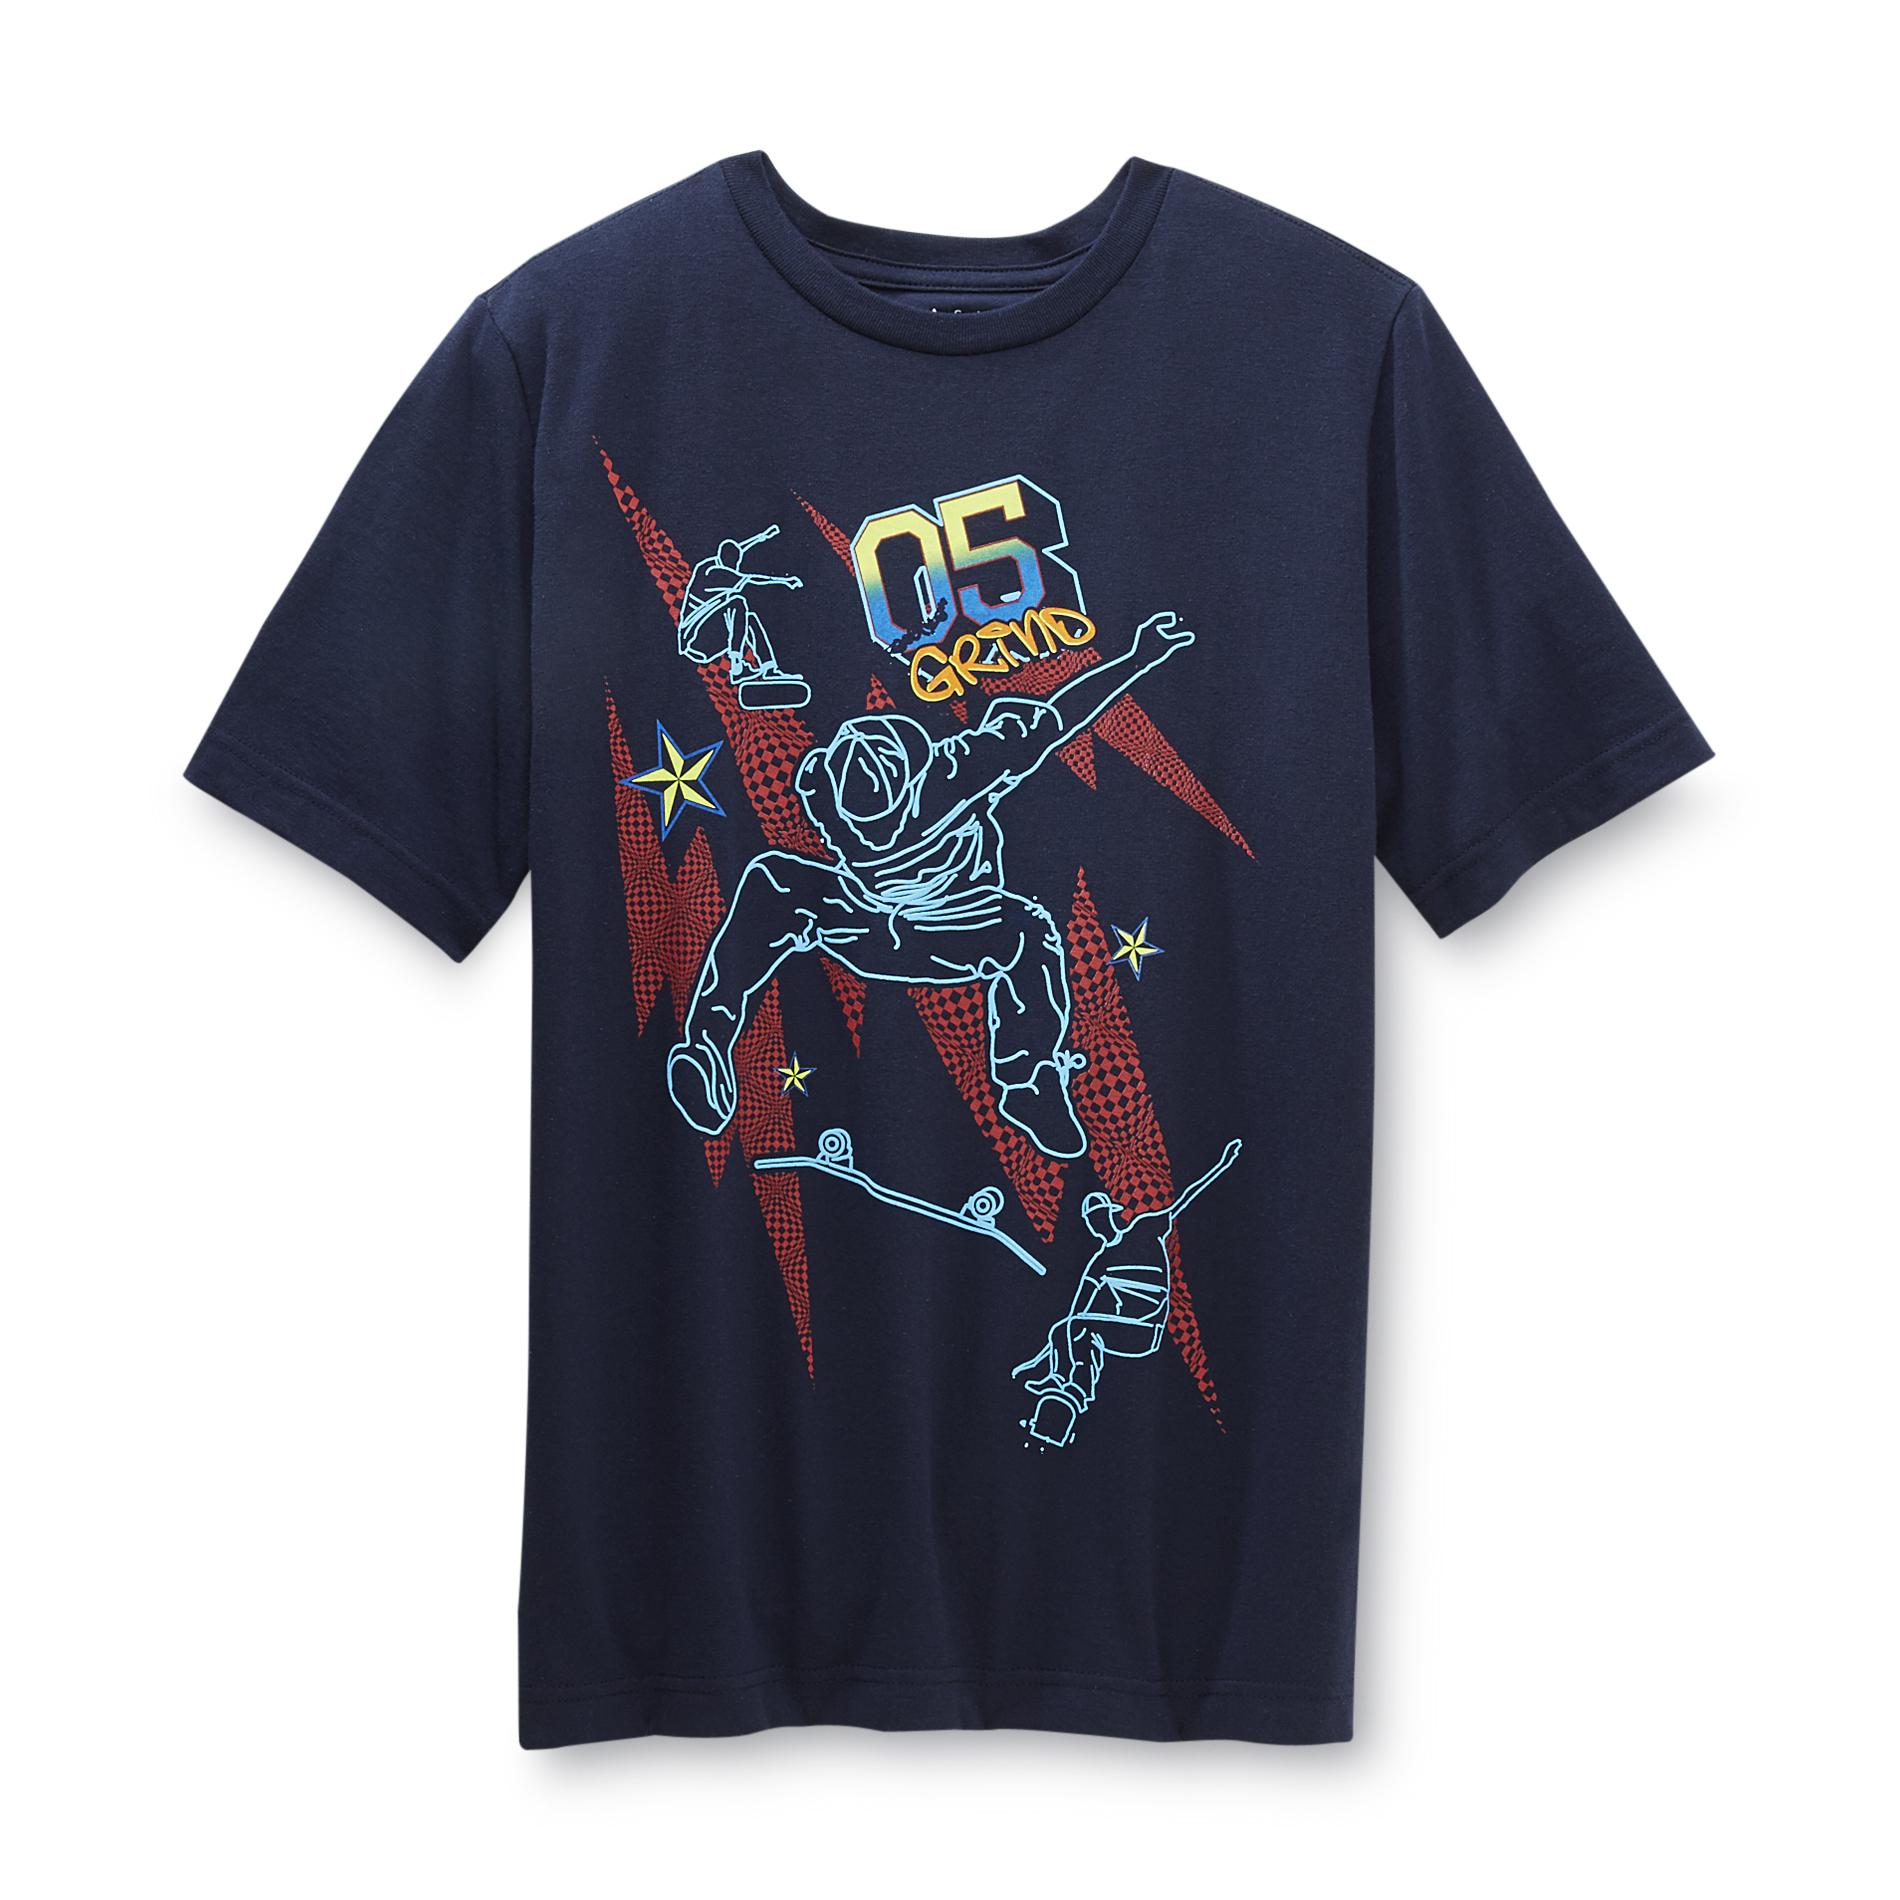 Basic Editions Boy's Graphic T-Shirt - Skateboarders